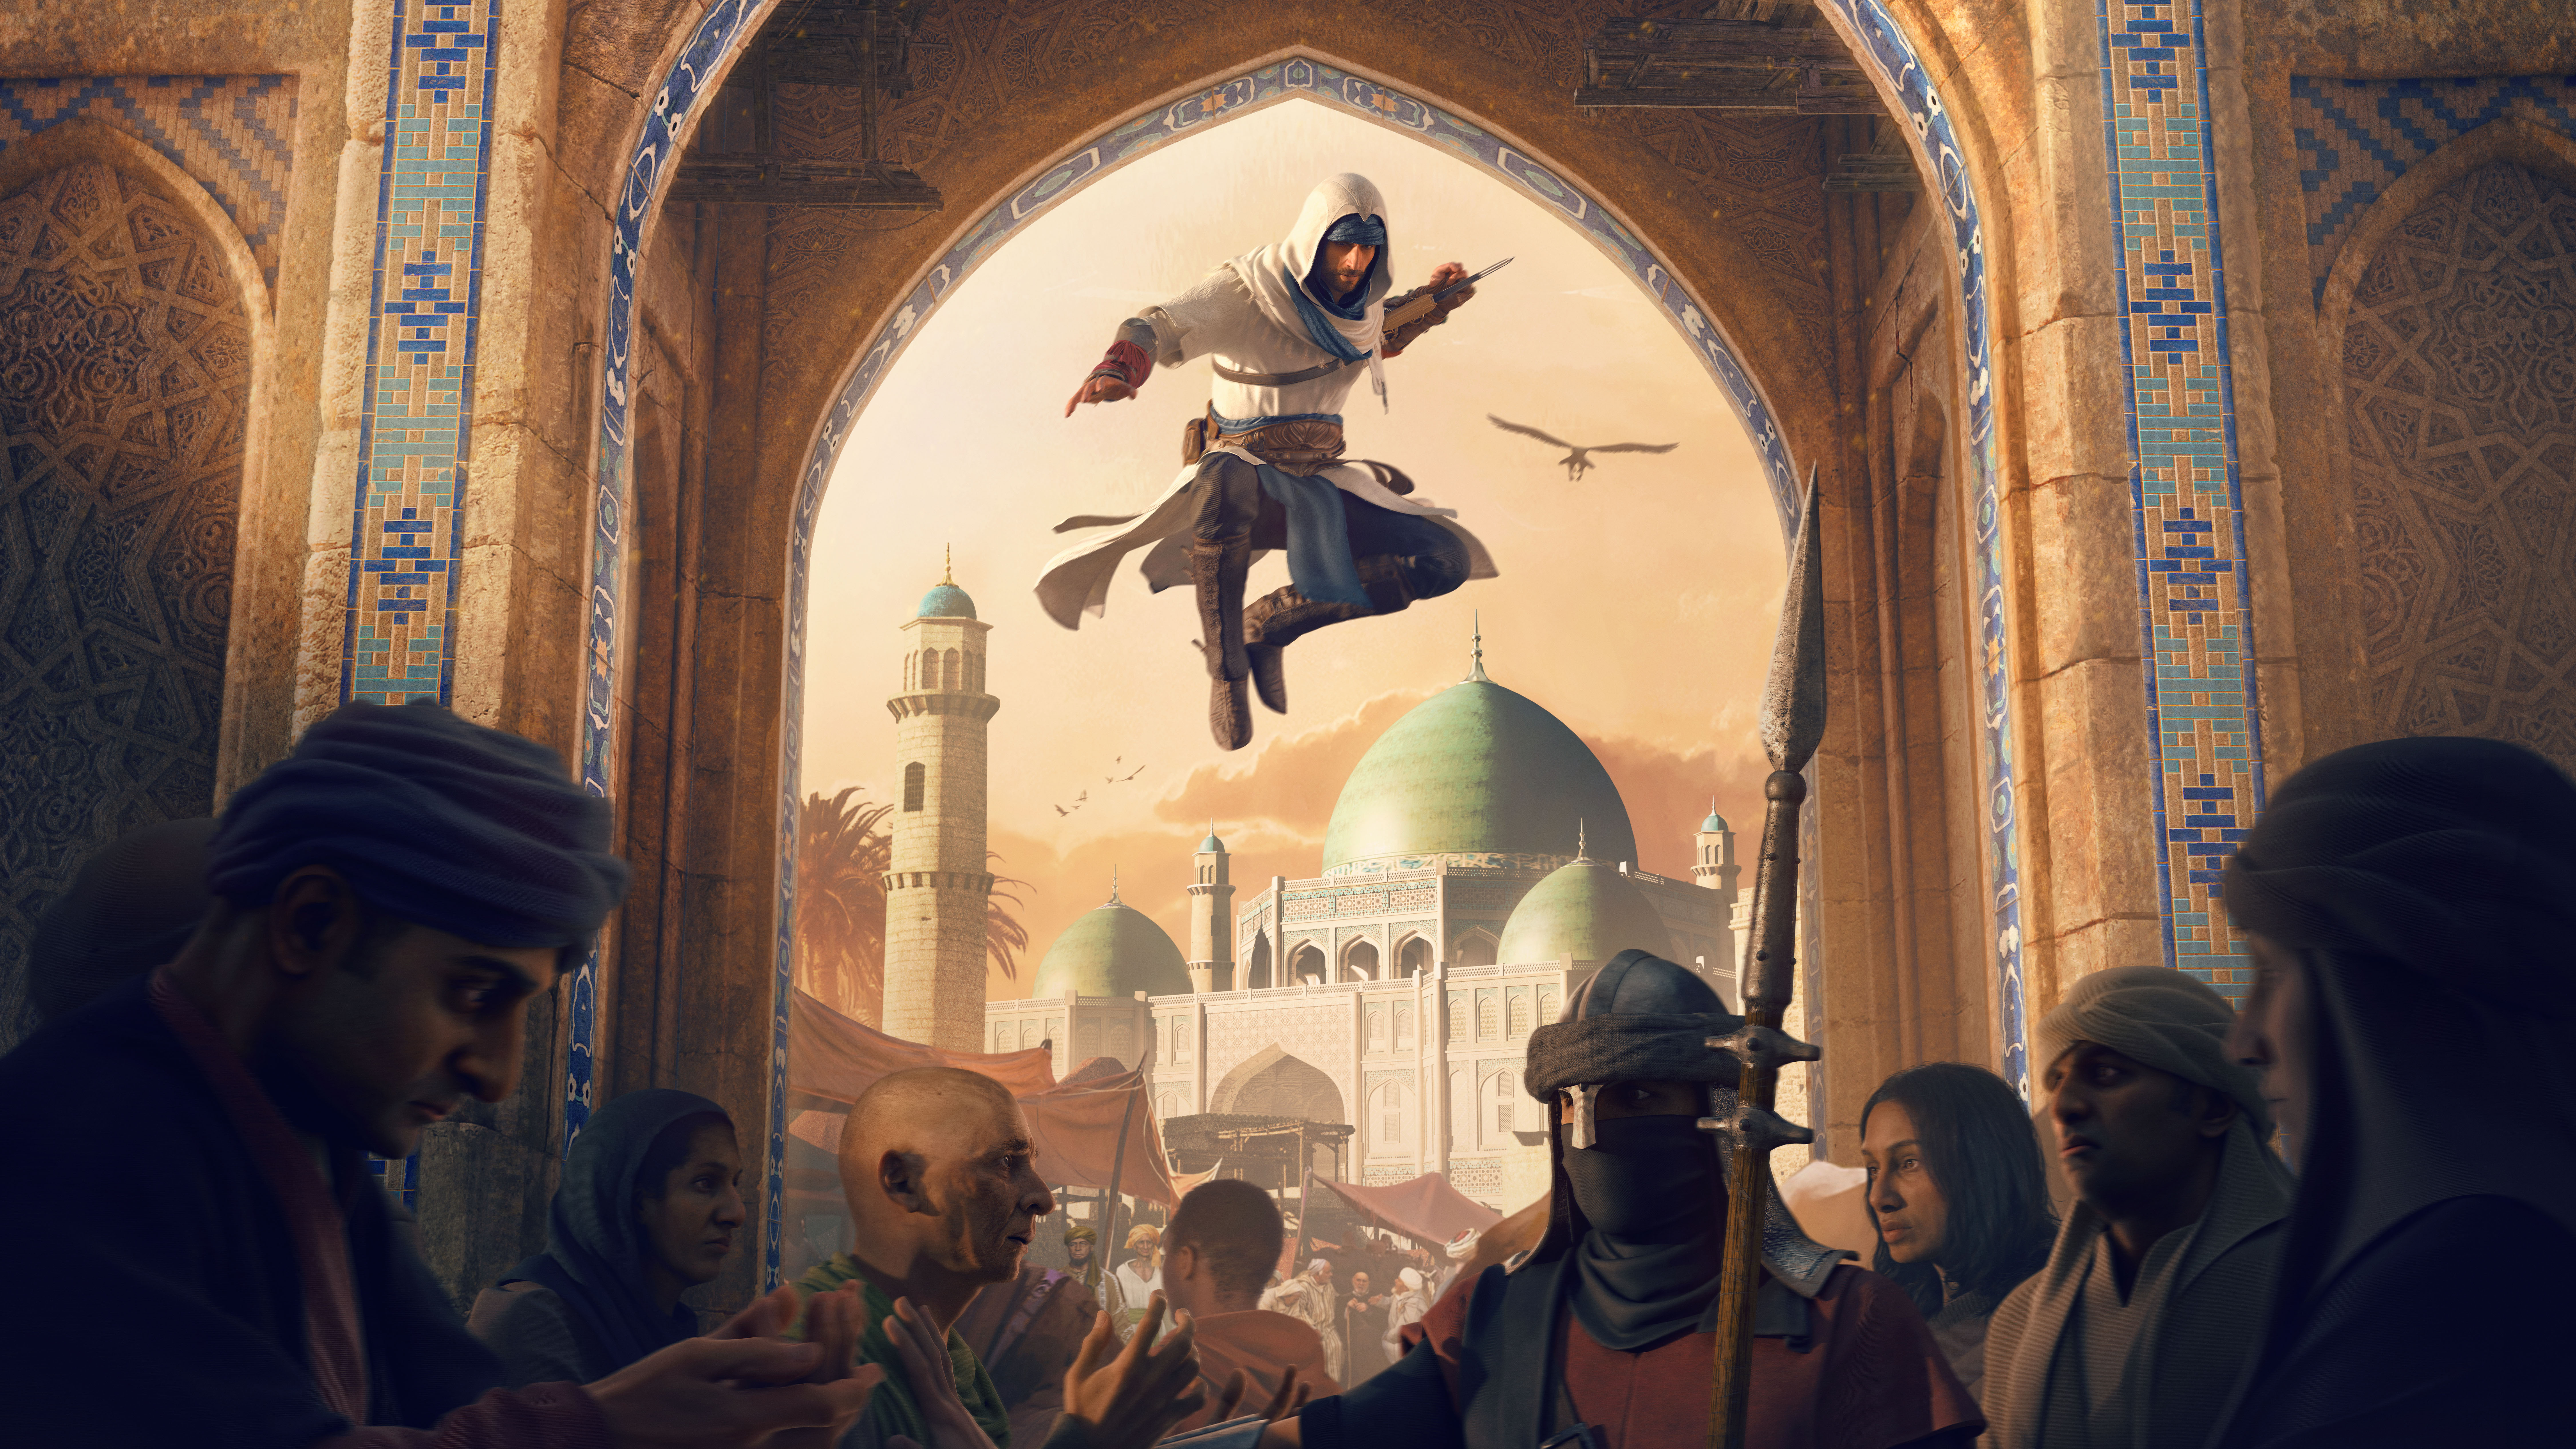 Assassin's Creed Mirage: the throwback stealth system, setting, black box  missions and more